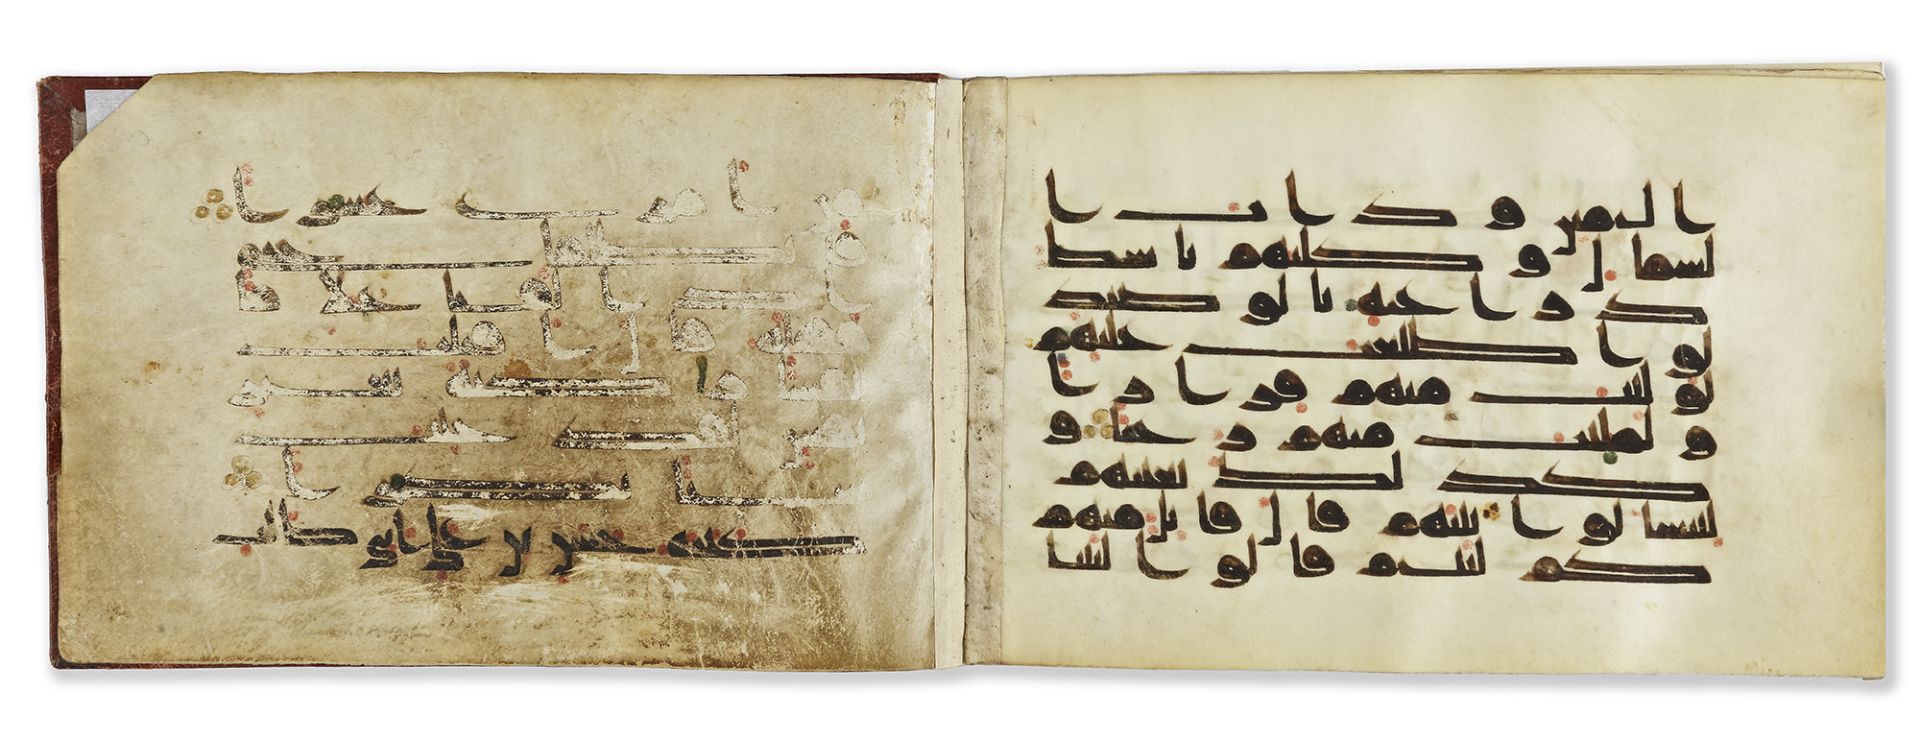 AN EASTERN KUFIC SECTION ON VELLUM, NORTH AFRICA OR NEAR EAST, 9TH CENTURY - Image 8 of 9